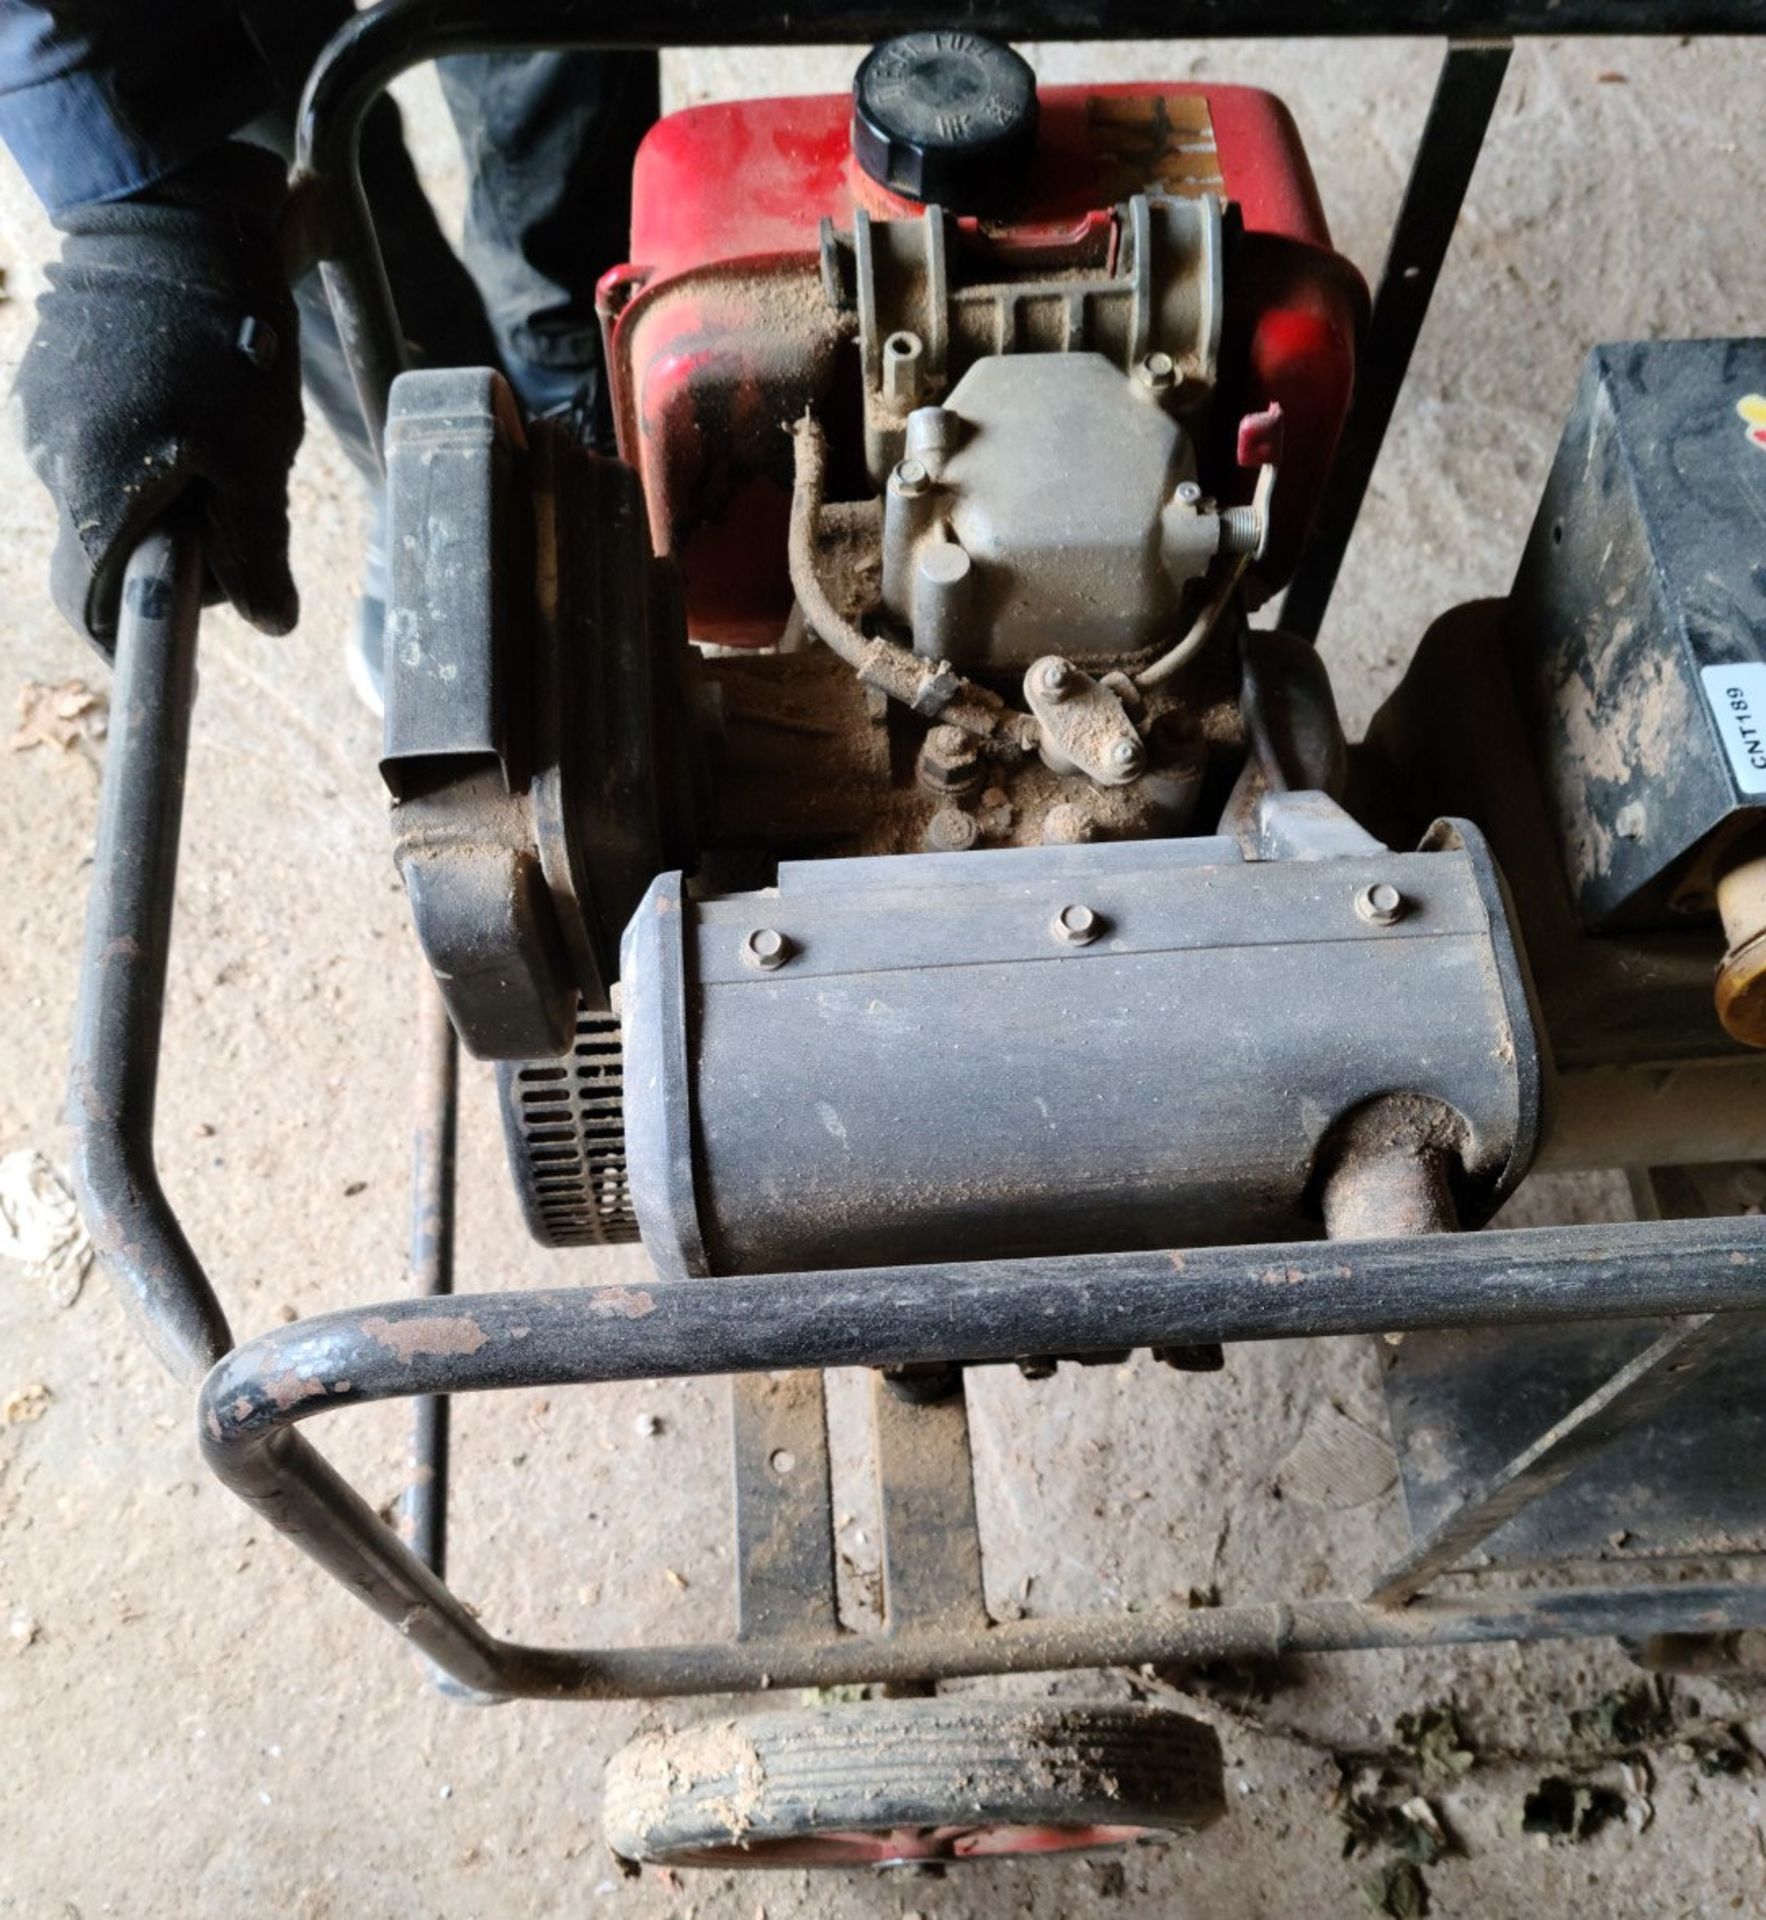 1 x Yanmar Air-Cooled Diesel Generator With 110V Sockets - Ref: CNT189 - CL846 - Location: Oxford - Image 3 of 9